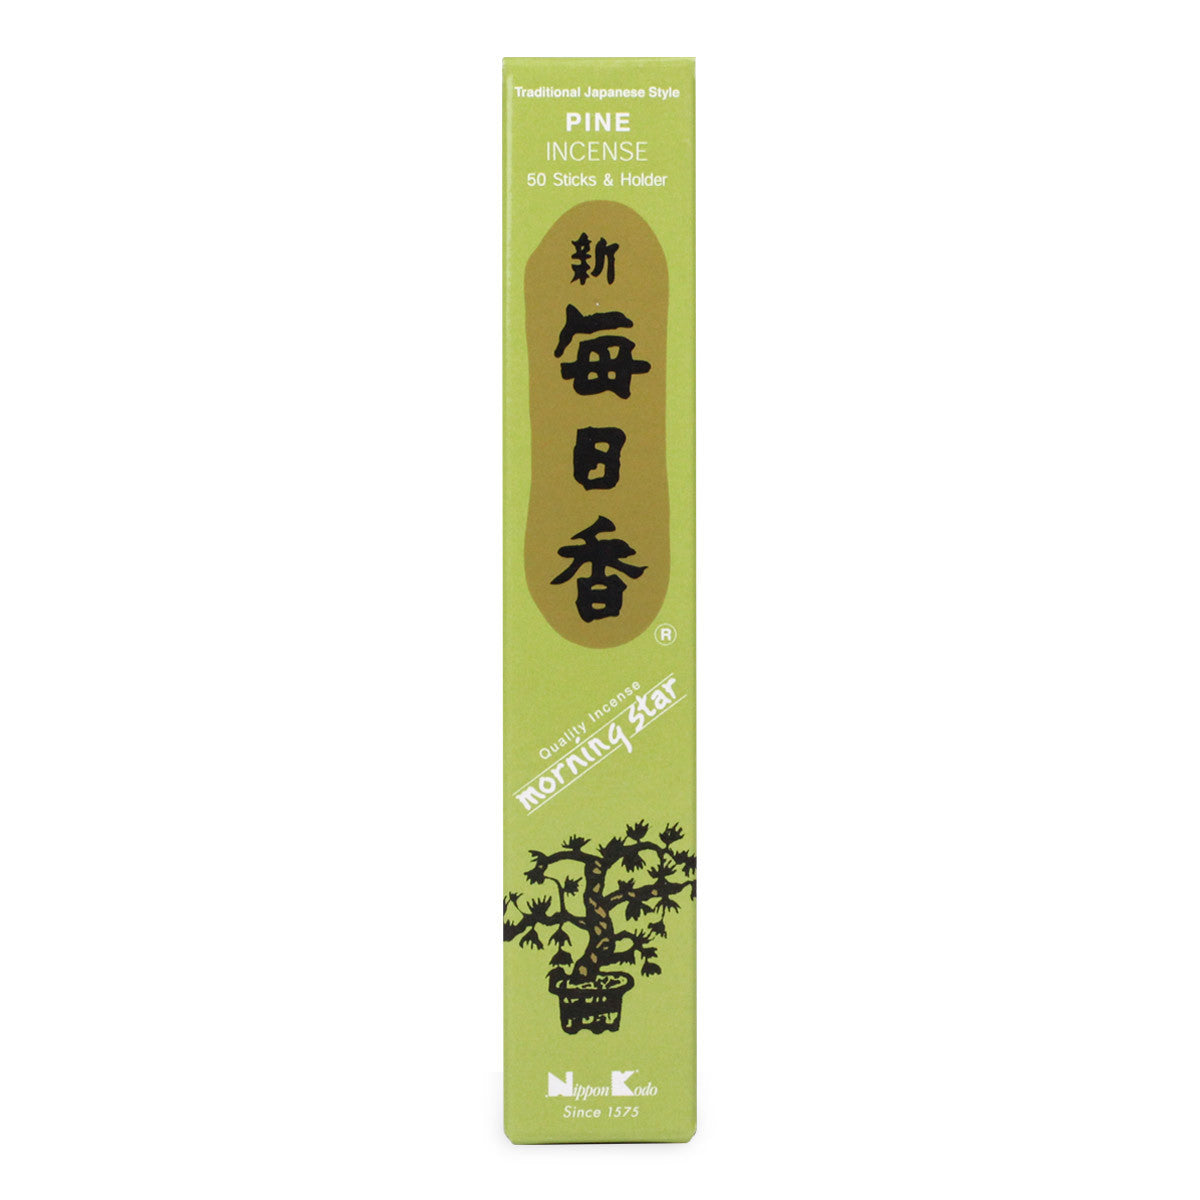 Primary image of Pine Incense